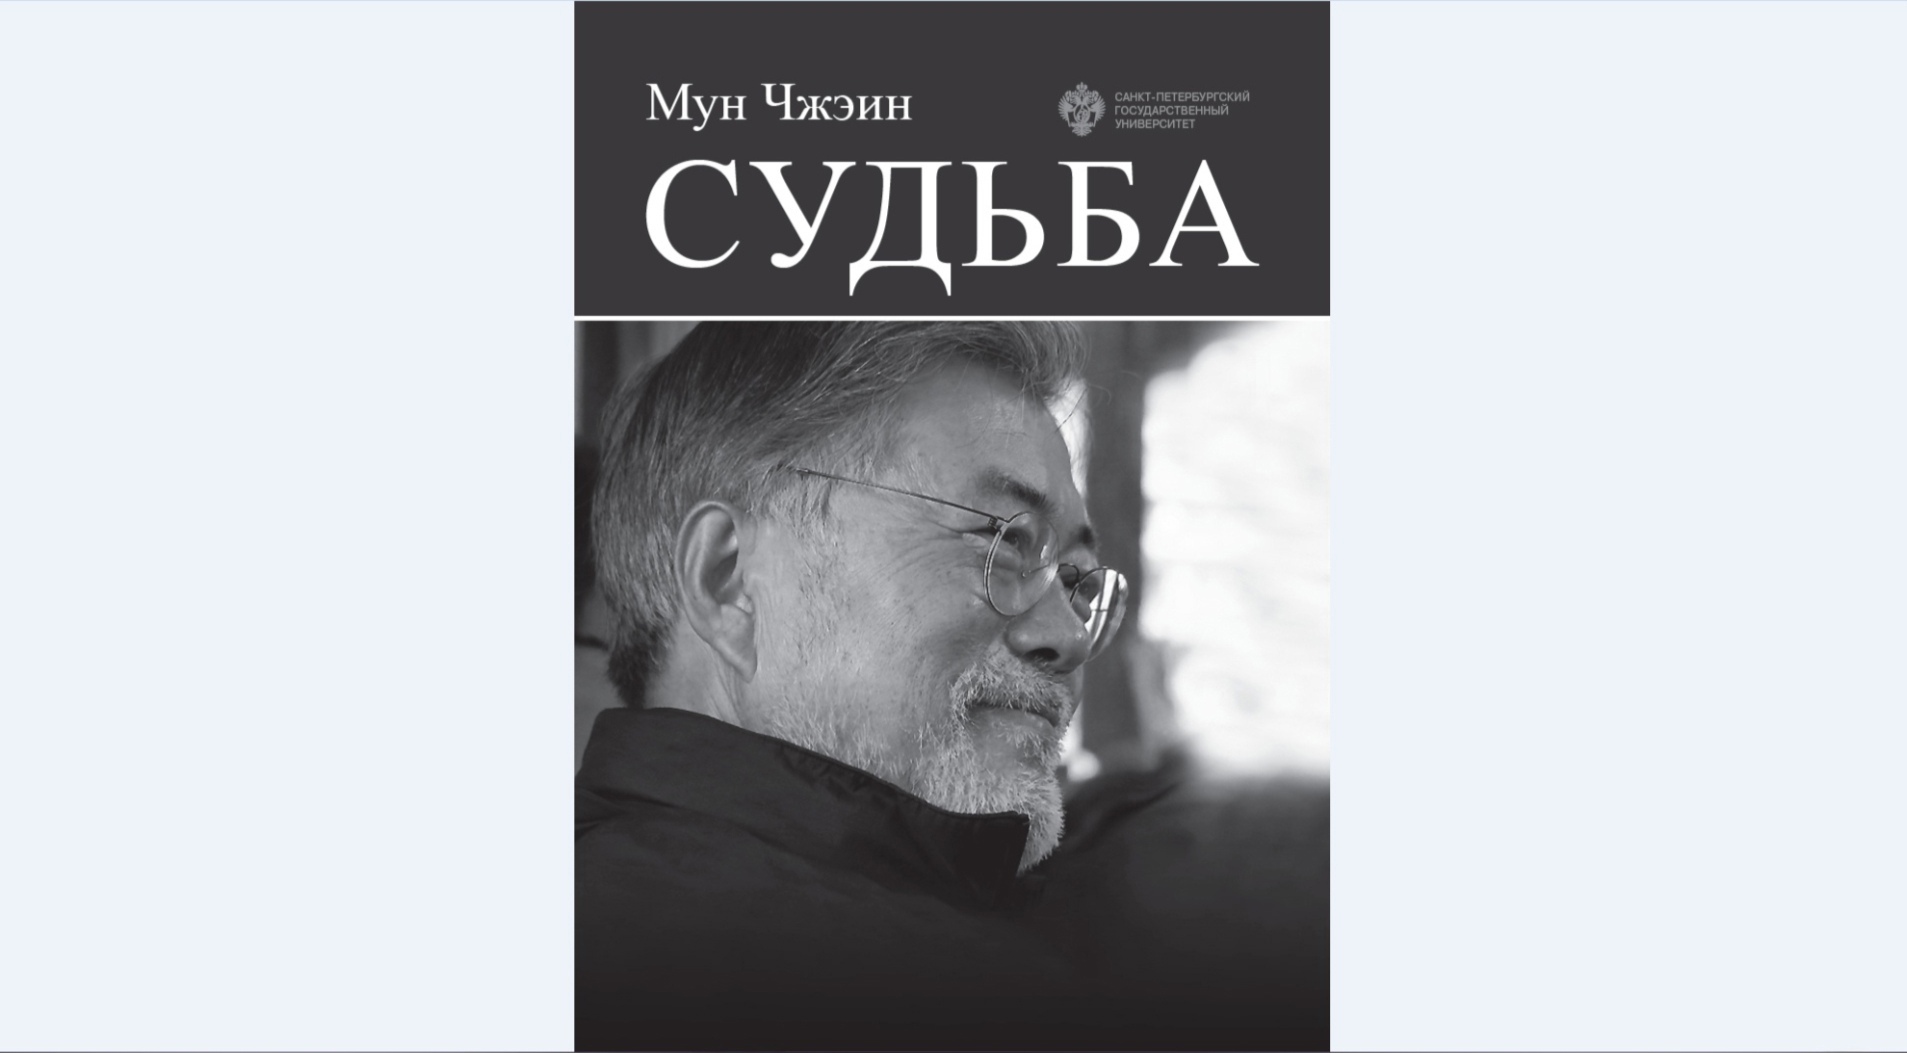  St Petersburg University Publishing House publishes autobiography of Moon Jae-in, President of the Republic of Korea